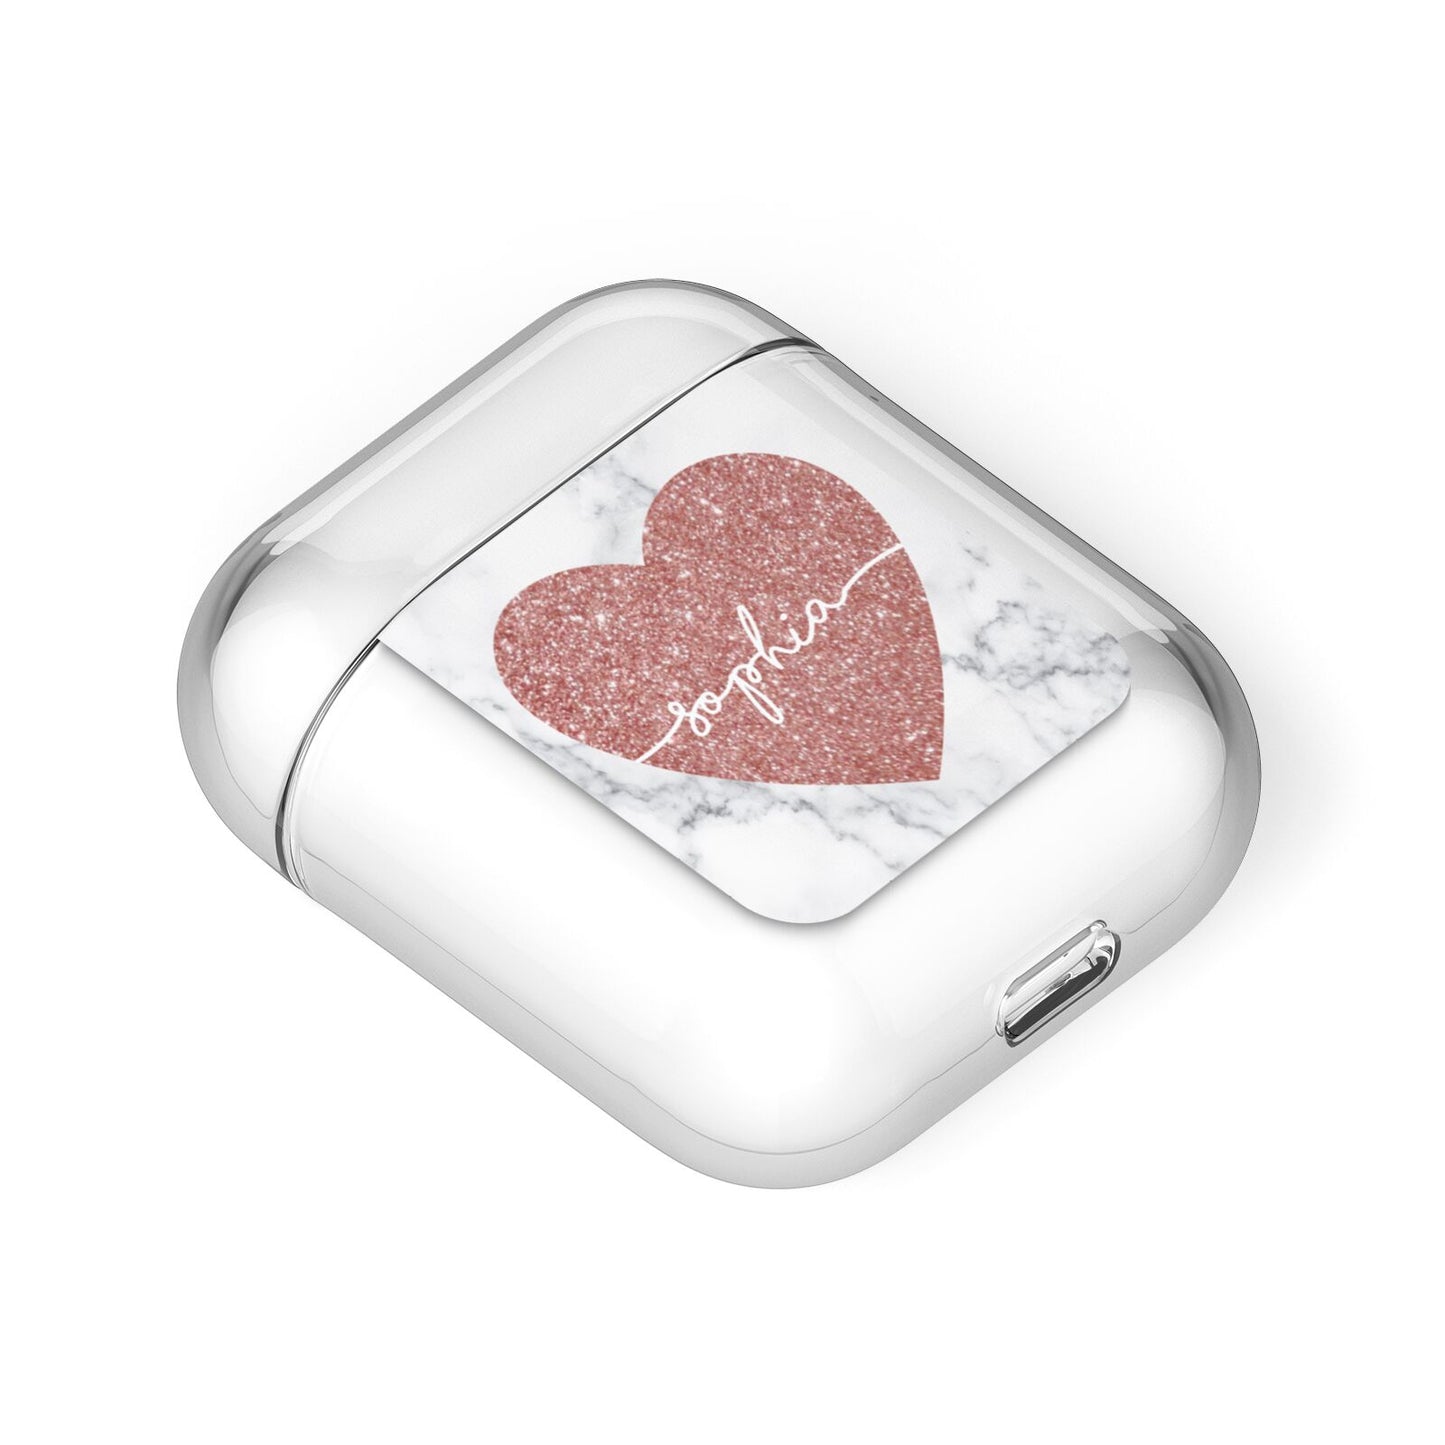 Marble Rose Gold Glitter Heart Personalised Name AirPods Case Laid Flat